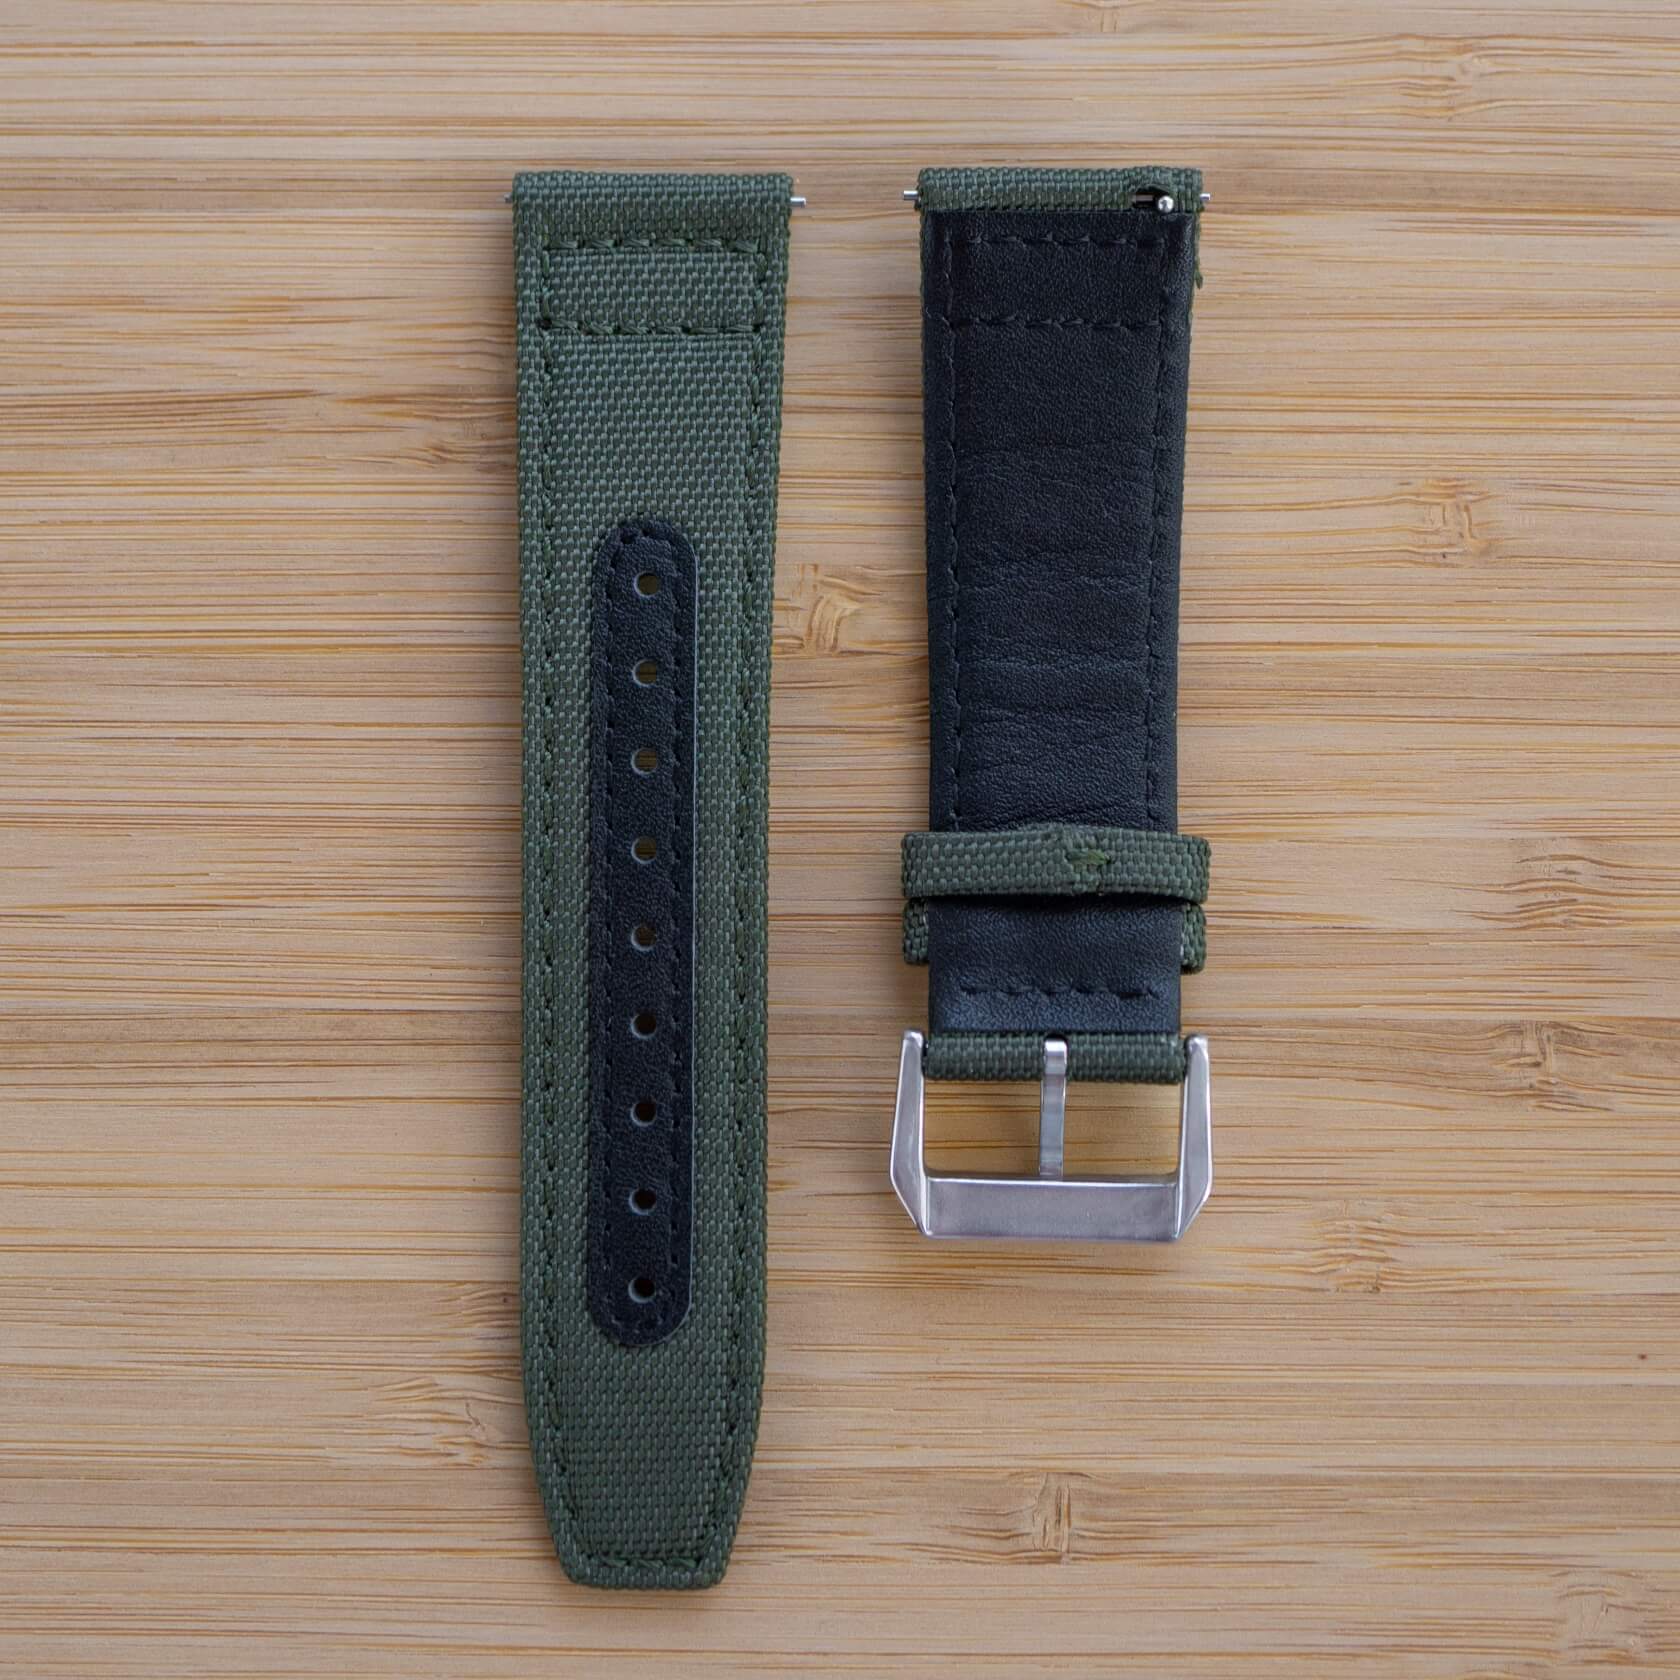 The strap has integrated quick-release spring bars, and the leather underside